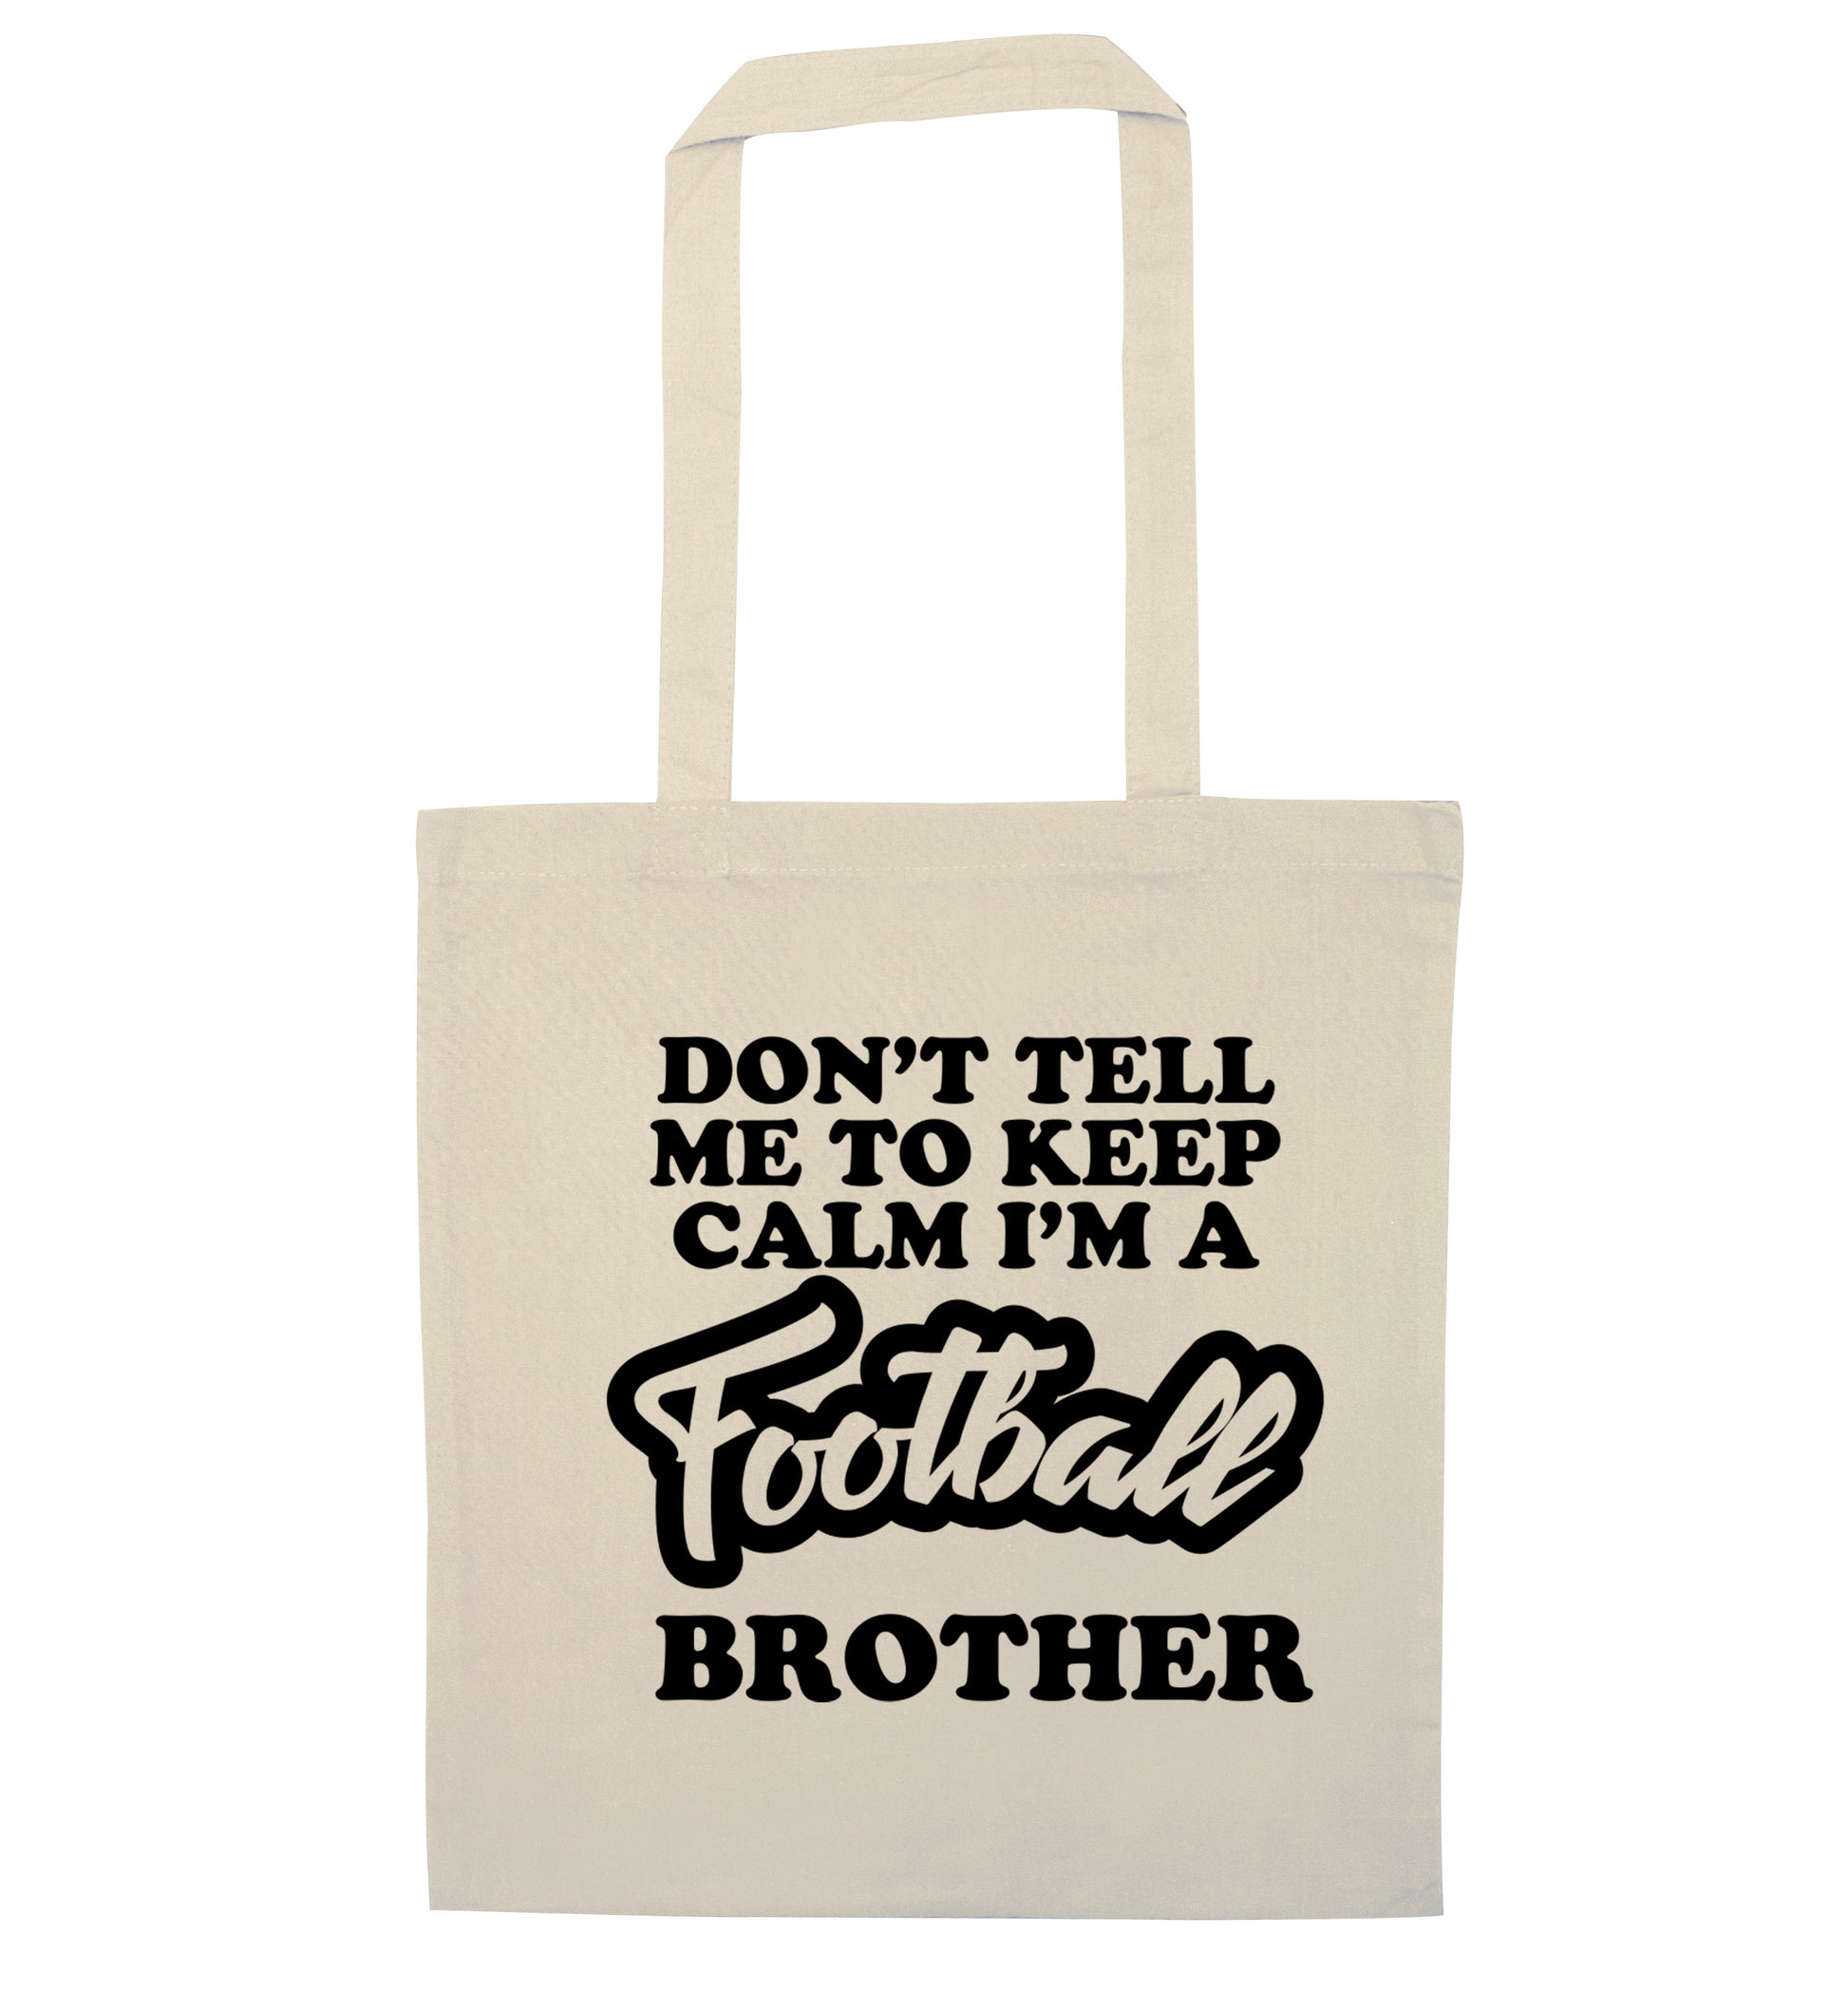 Don't tell me to keep calm I'm a football brother natural tote bag